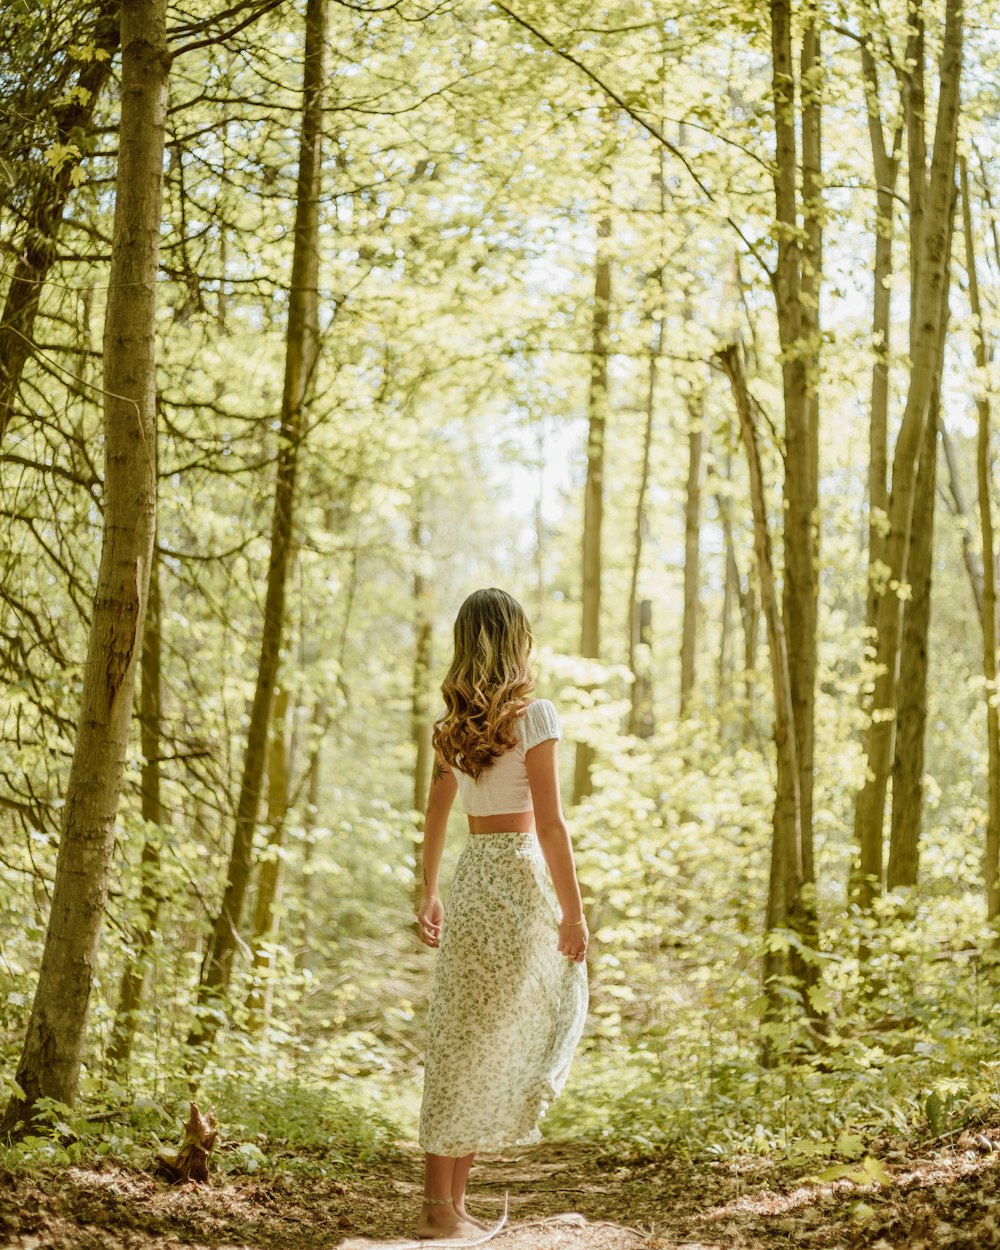 woman in white dress standing in the woods during daytime